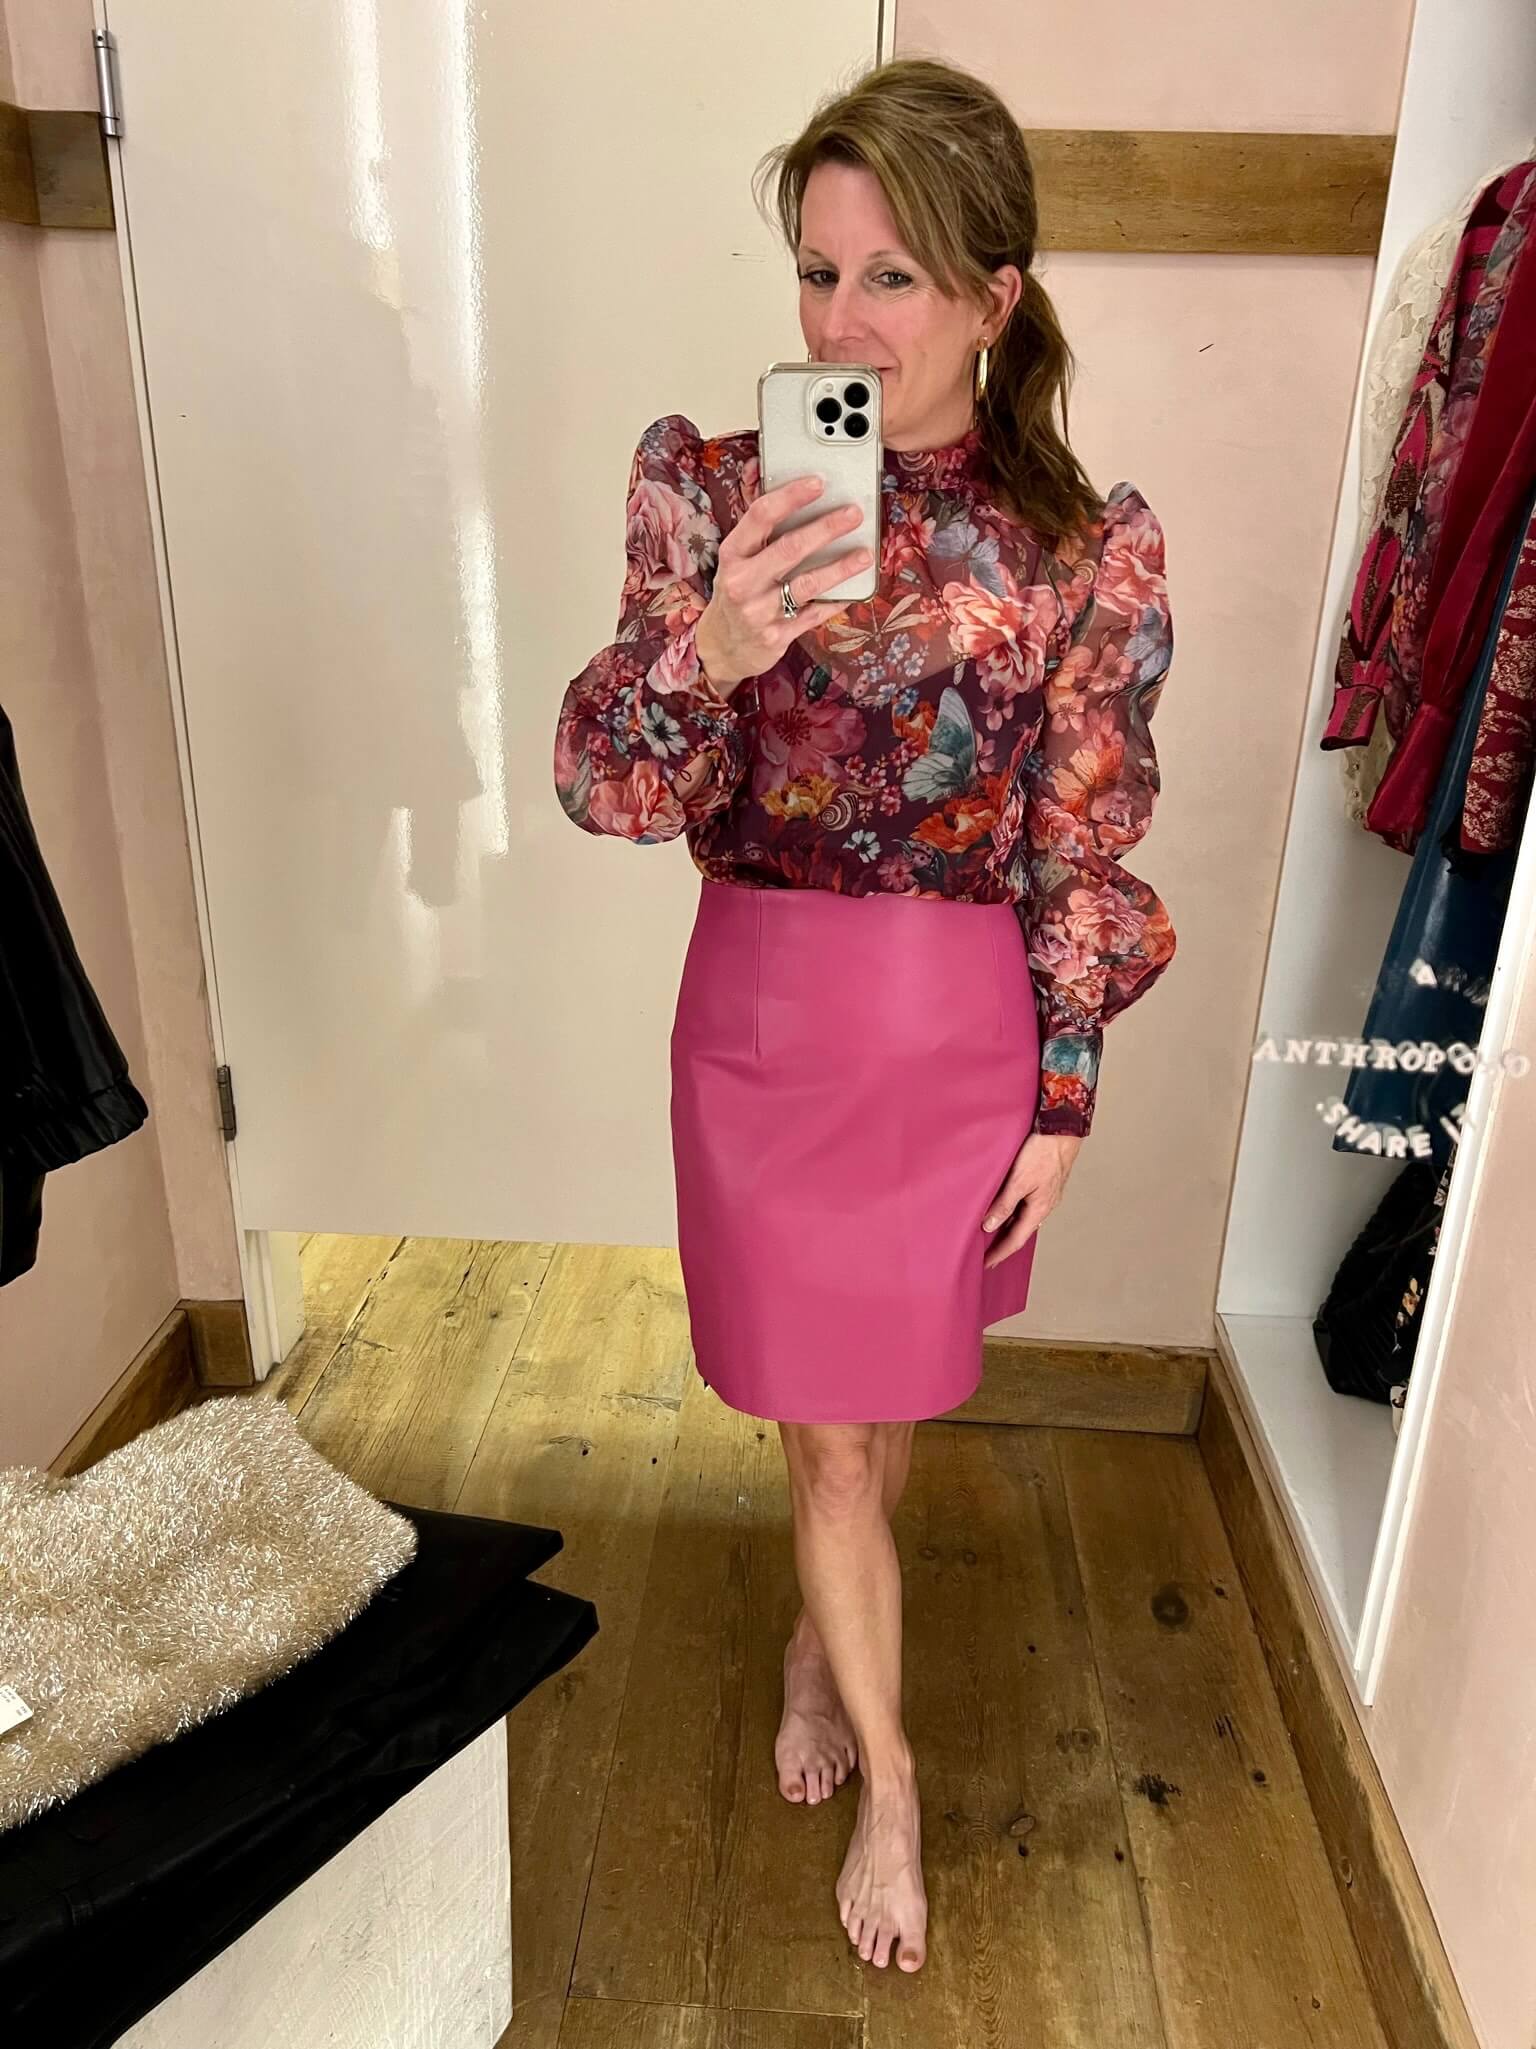 The Best Holiday Pieces At Anthropologie floral organza blouse how to wear organza this holiday season how to wear a floral pattern for holiday parties how to wear hot pink for Christmas parties how to style hot pink for the holidays